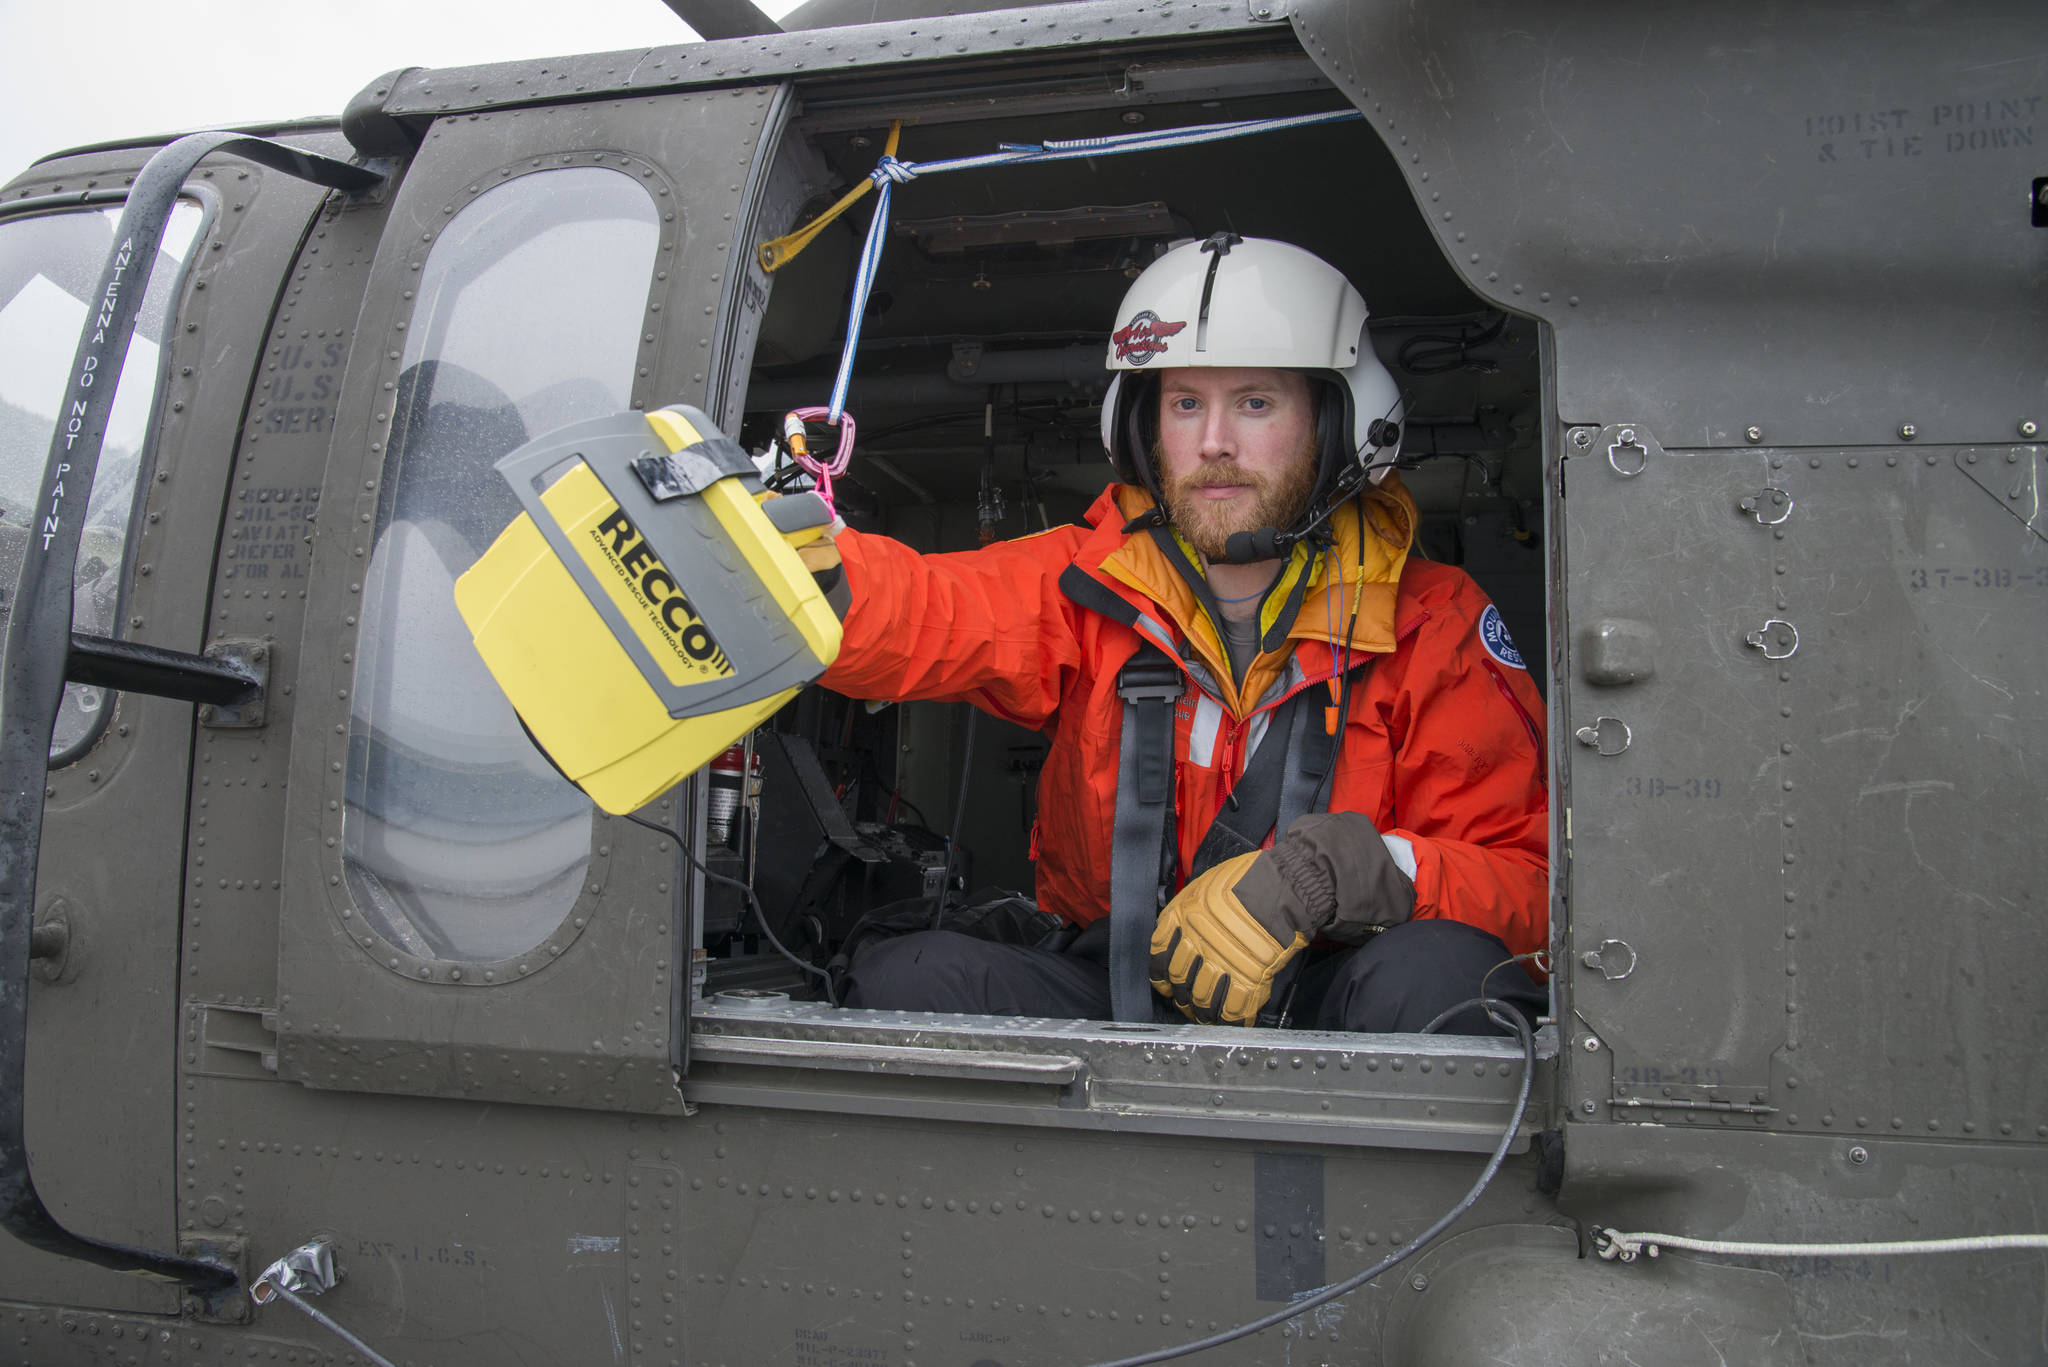 Pat Dryer of Juneau Mountain Rescue, testing out the RECCO Rescue System on the tarmac, in the Blackhawk Helicopter. JMR personnel believe this search is the first in Alaska that used a RECCO system from an aircraft to locate missing persons. (Courtesy photo | Ben Huff)